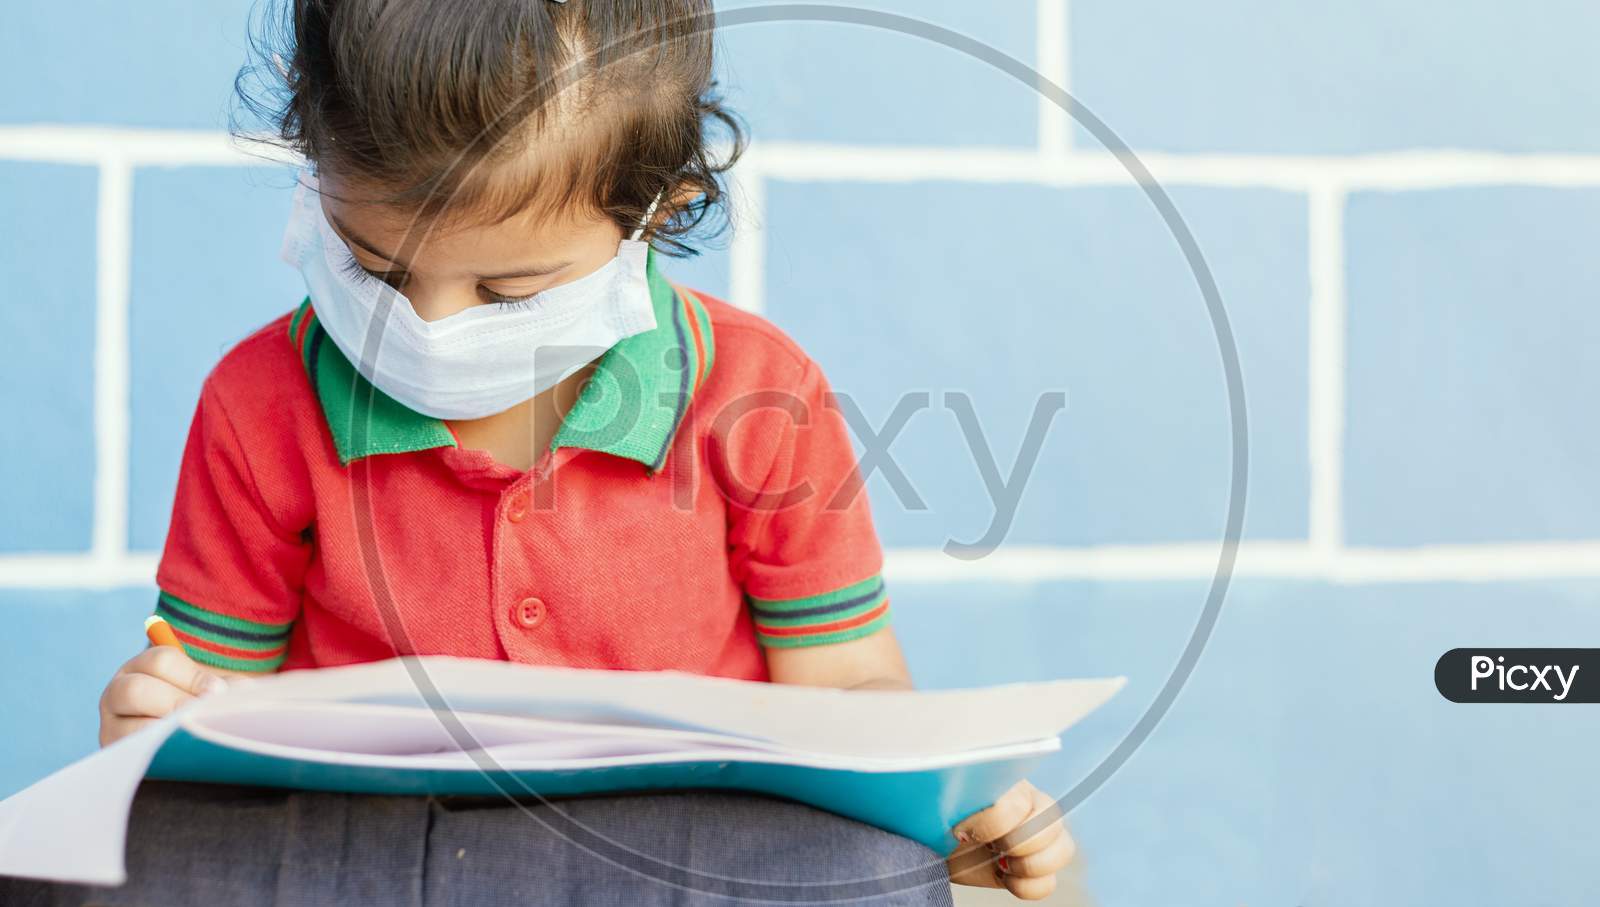 Covid 19 Or Coronavirus And Air Pollution Pm2.5 Concept - Little Girl Wearing Medical Mask And Busy In Writing At School - Showing Wuhan Covid-19 Or Sars Cov 19 Outbreak Or Epidemic Of Virus.